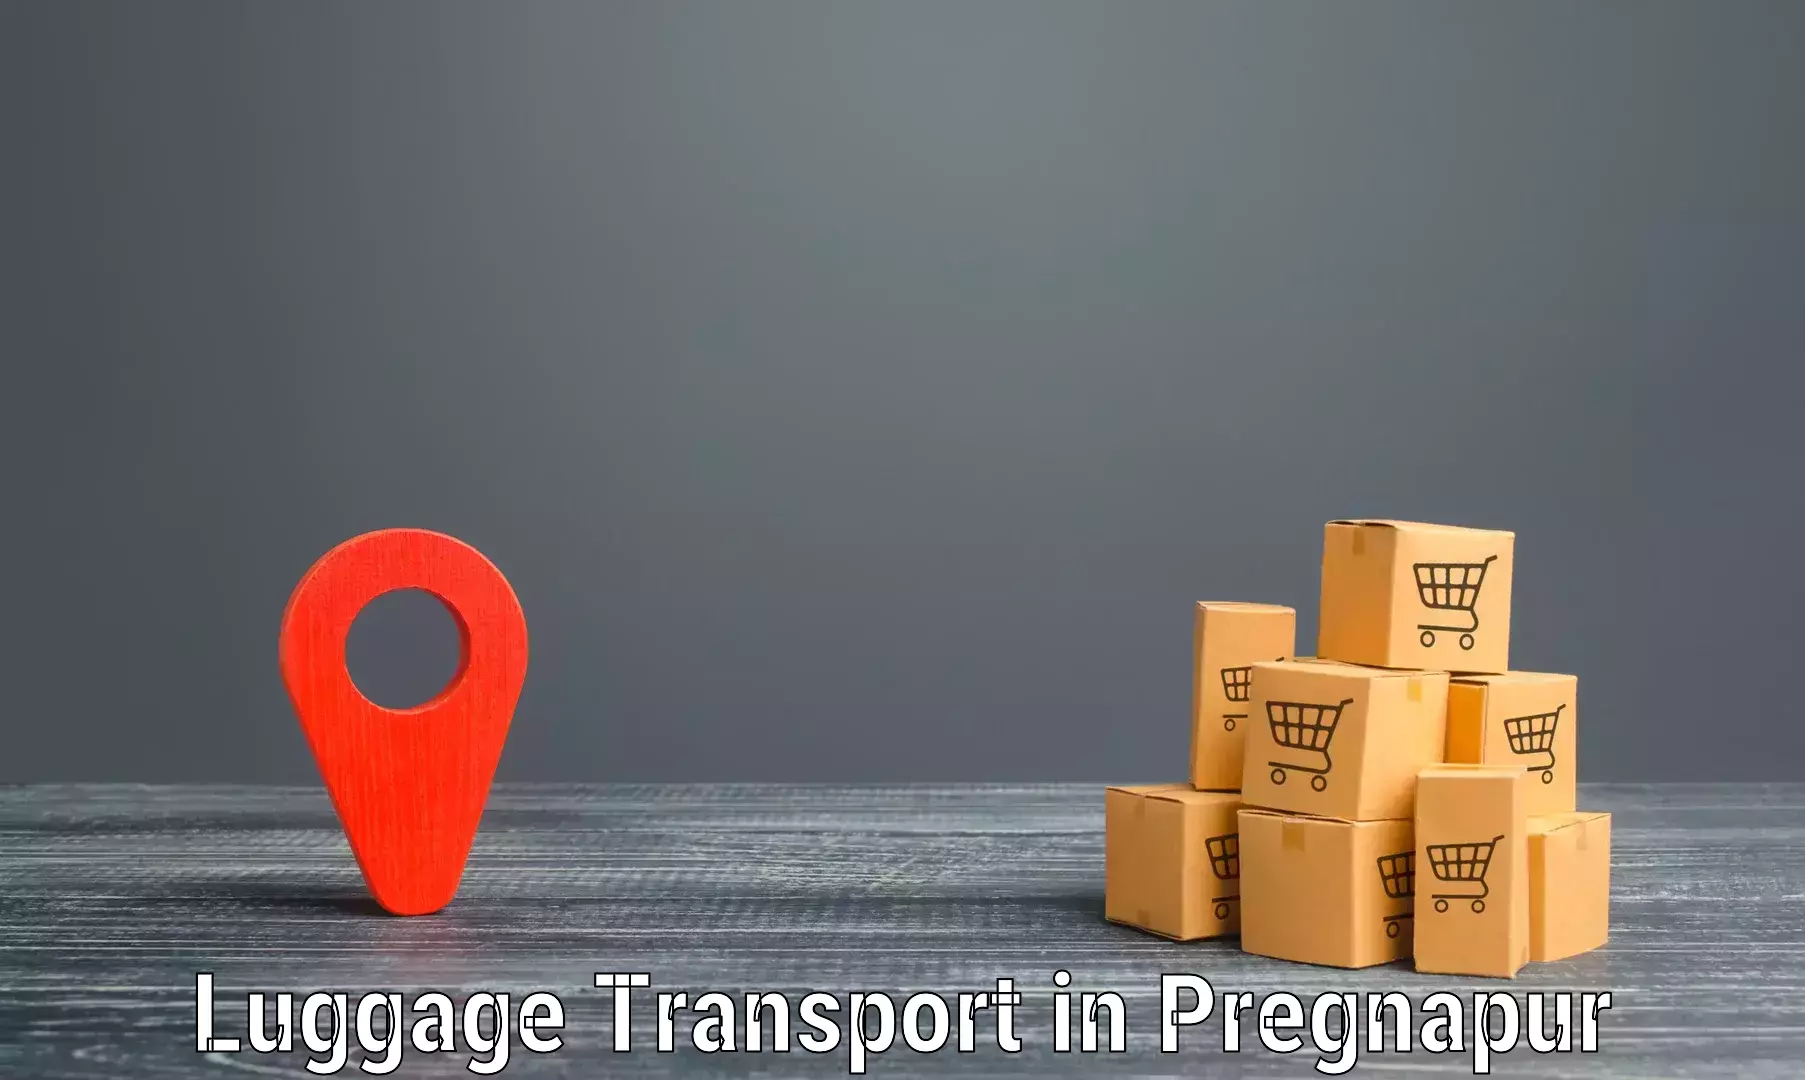 Business luggage transport in Pregnapur